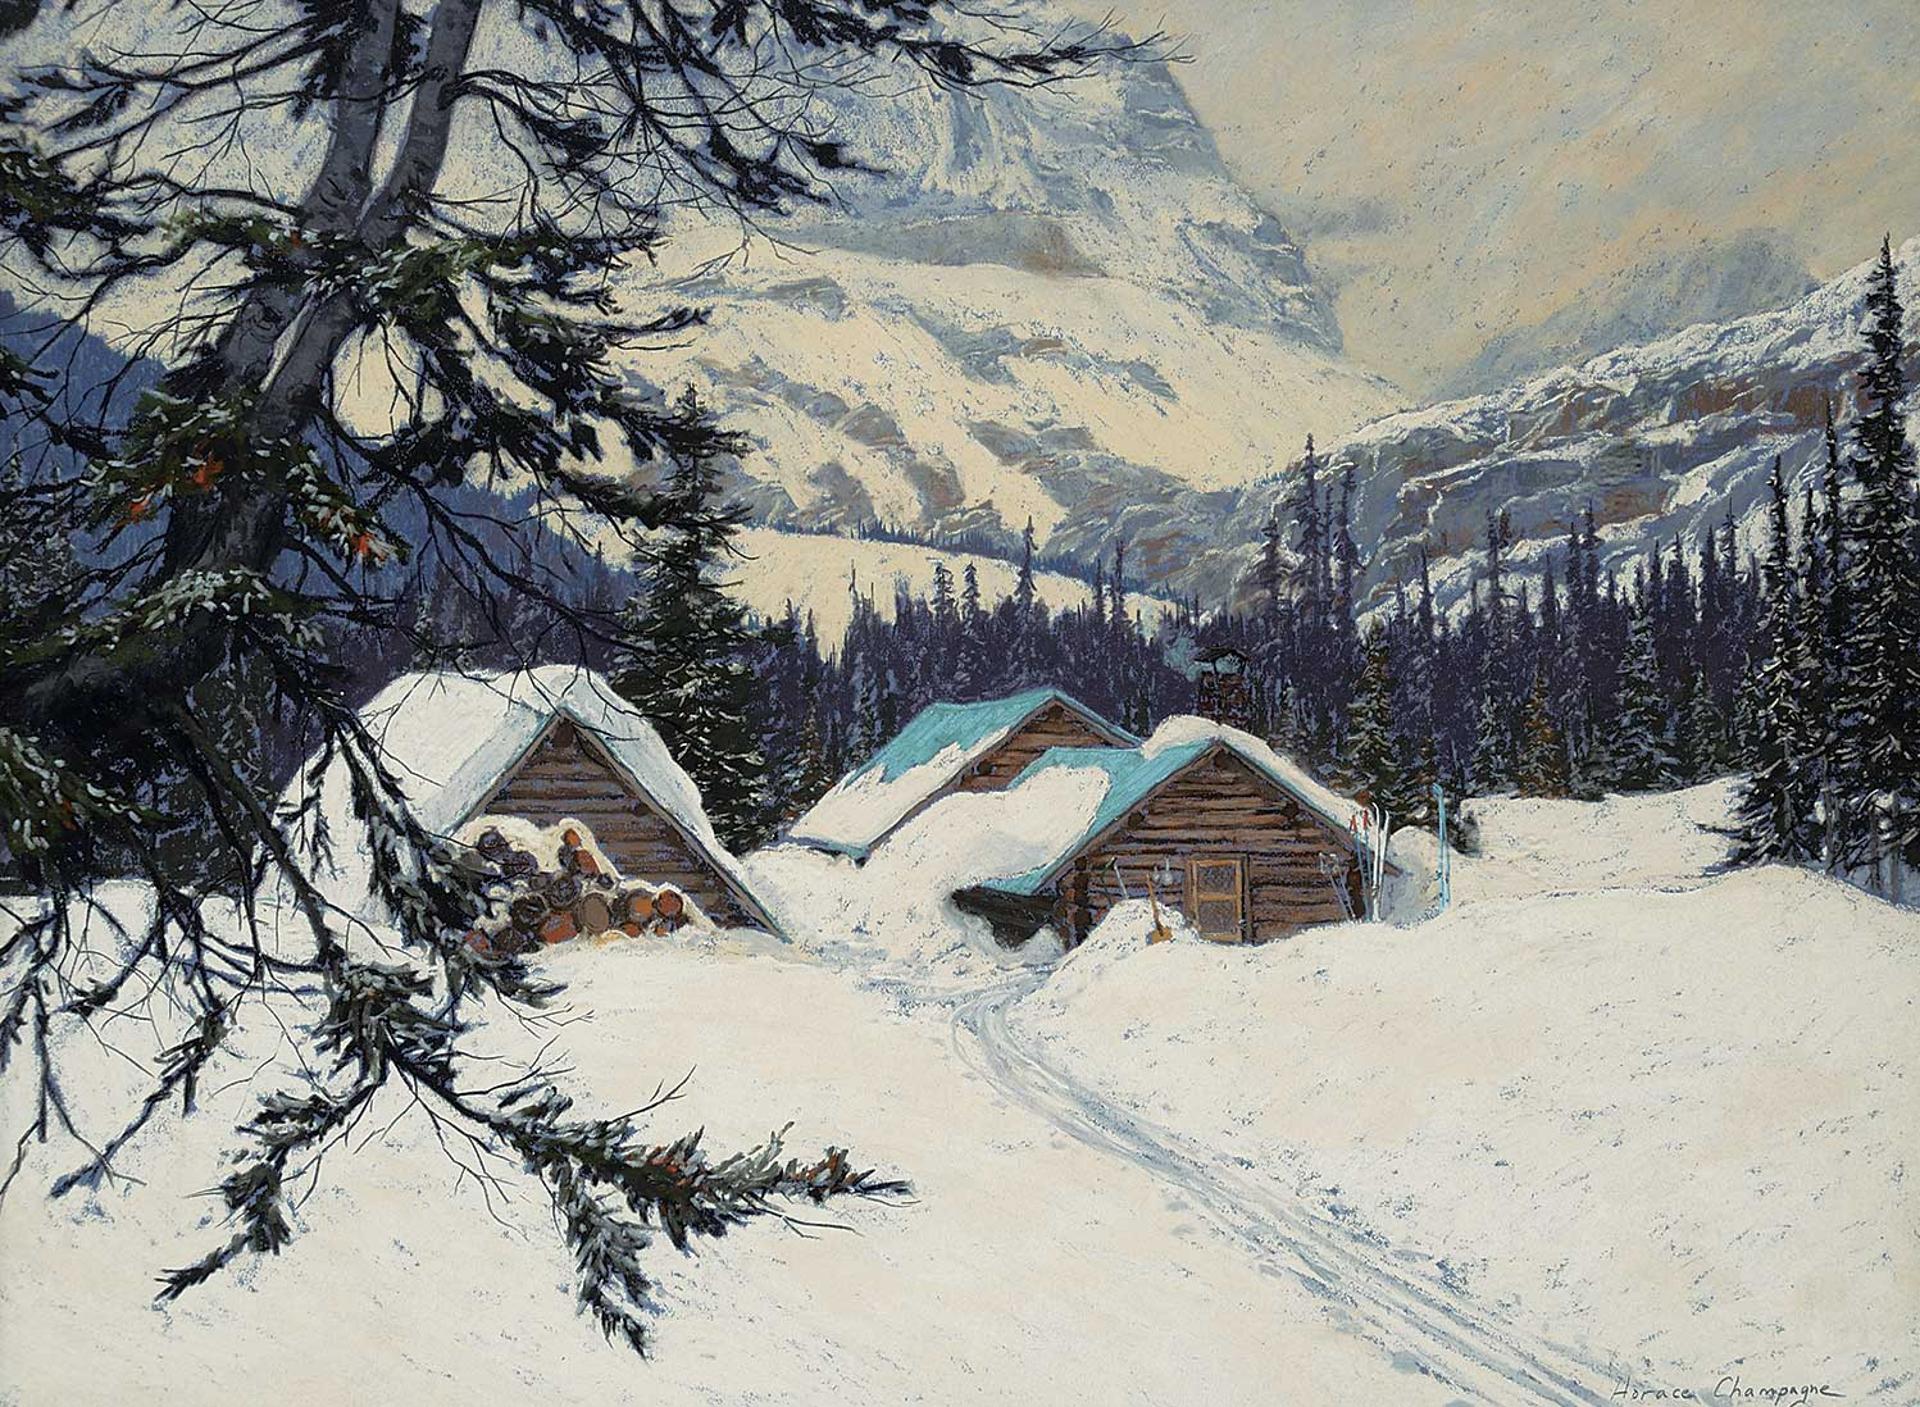 Horace Champagne (1937) - Untitled - Snowed In